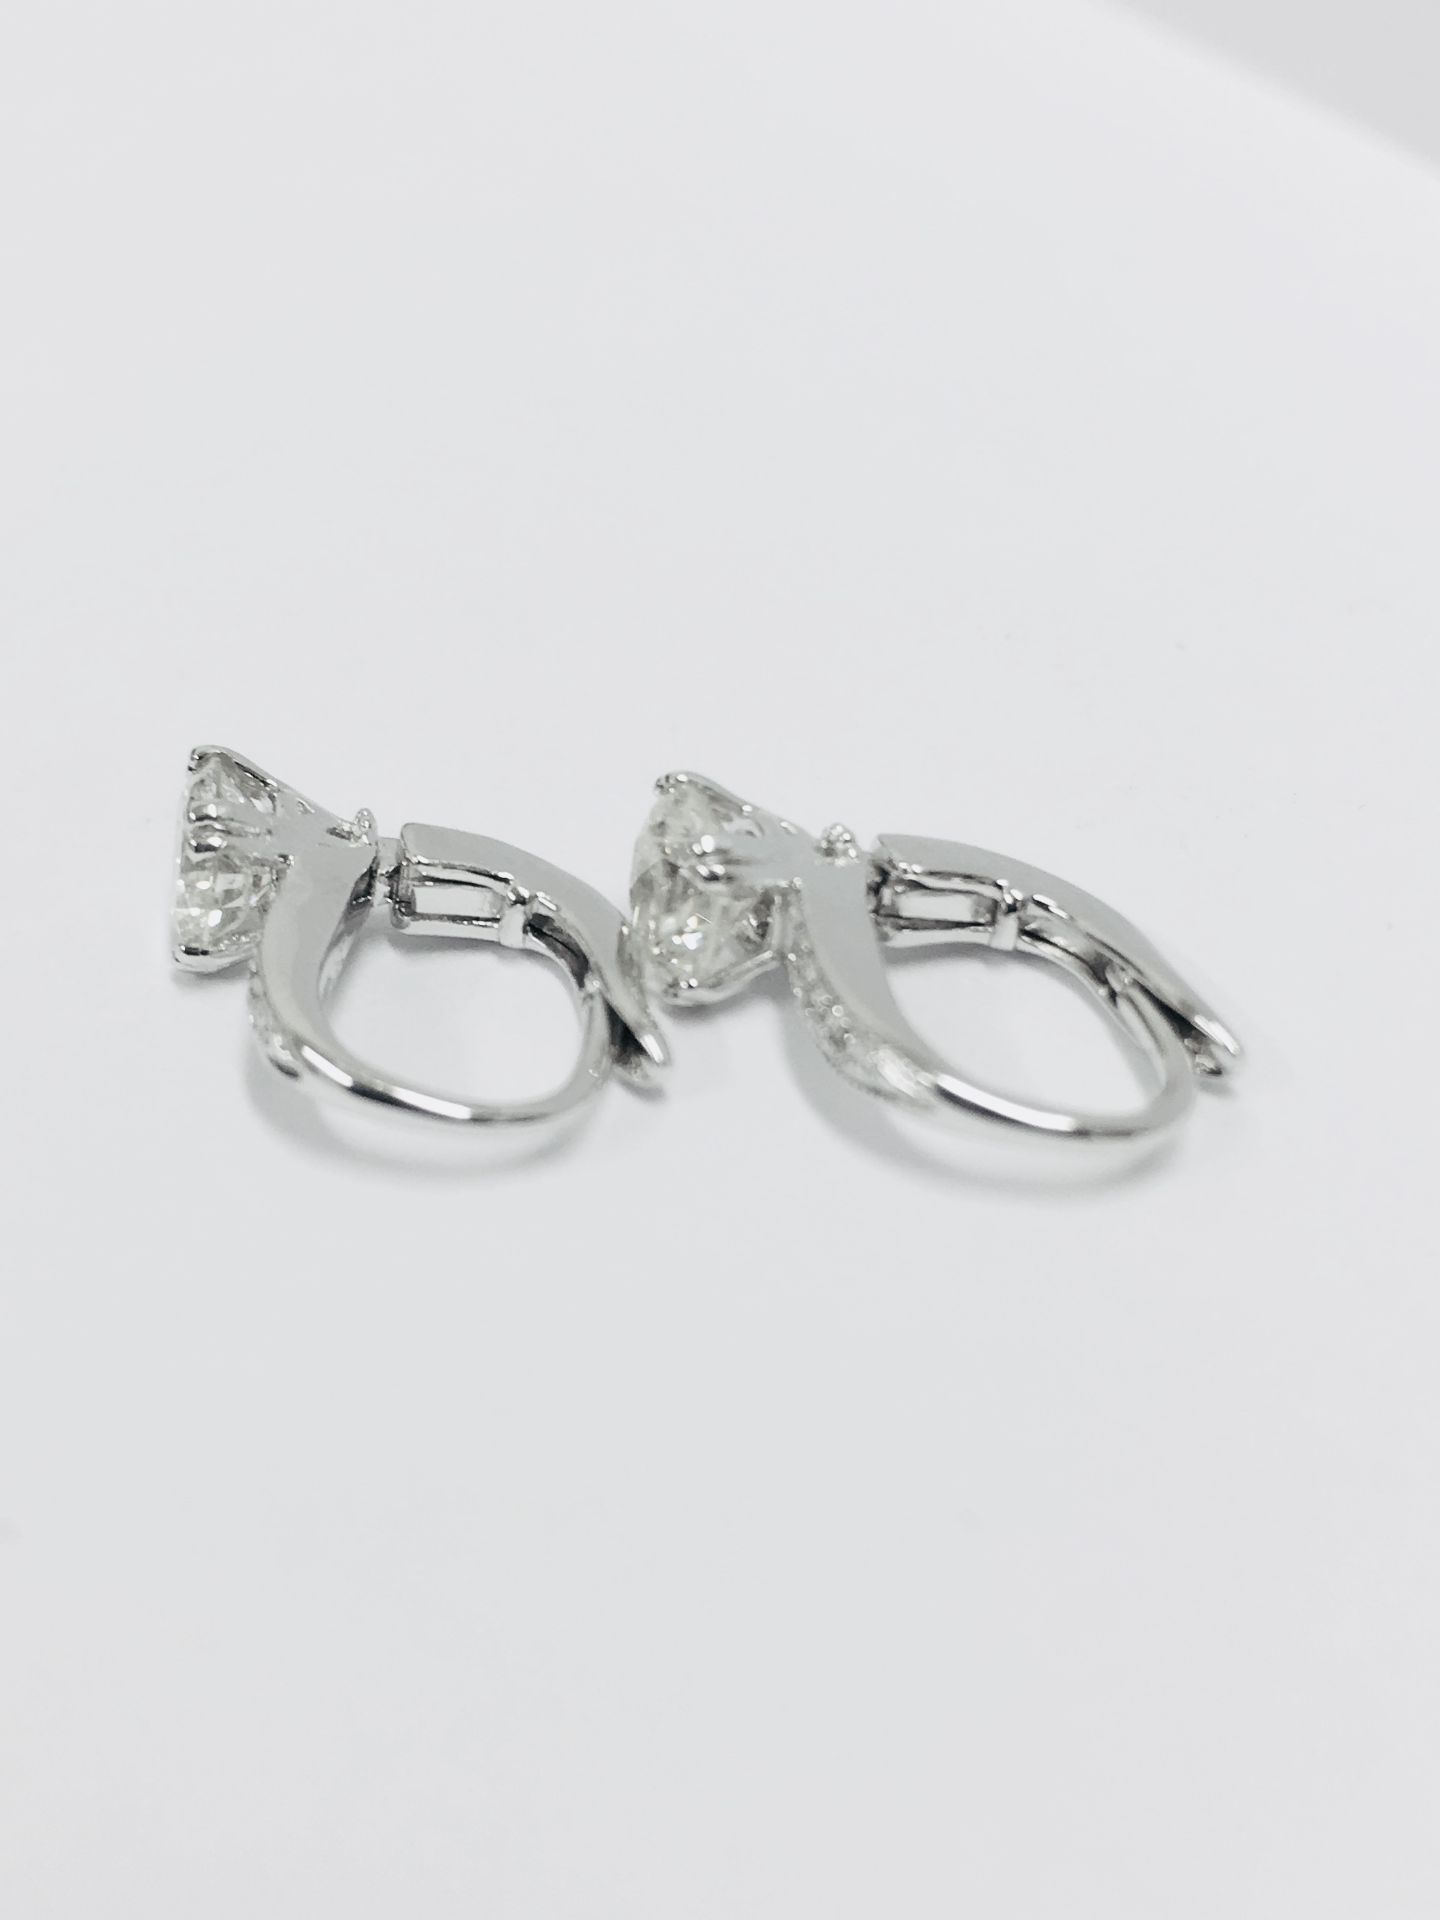 18ct white gold hoop style earrings with hinge fastners. 2 x 0.50ct Brilliant cut diamonds, i colour - Image 5 of 5